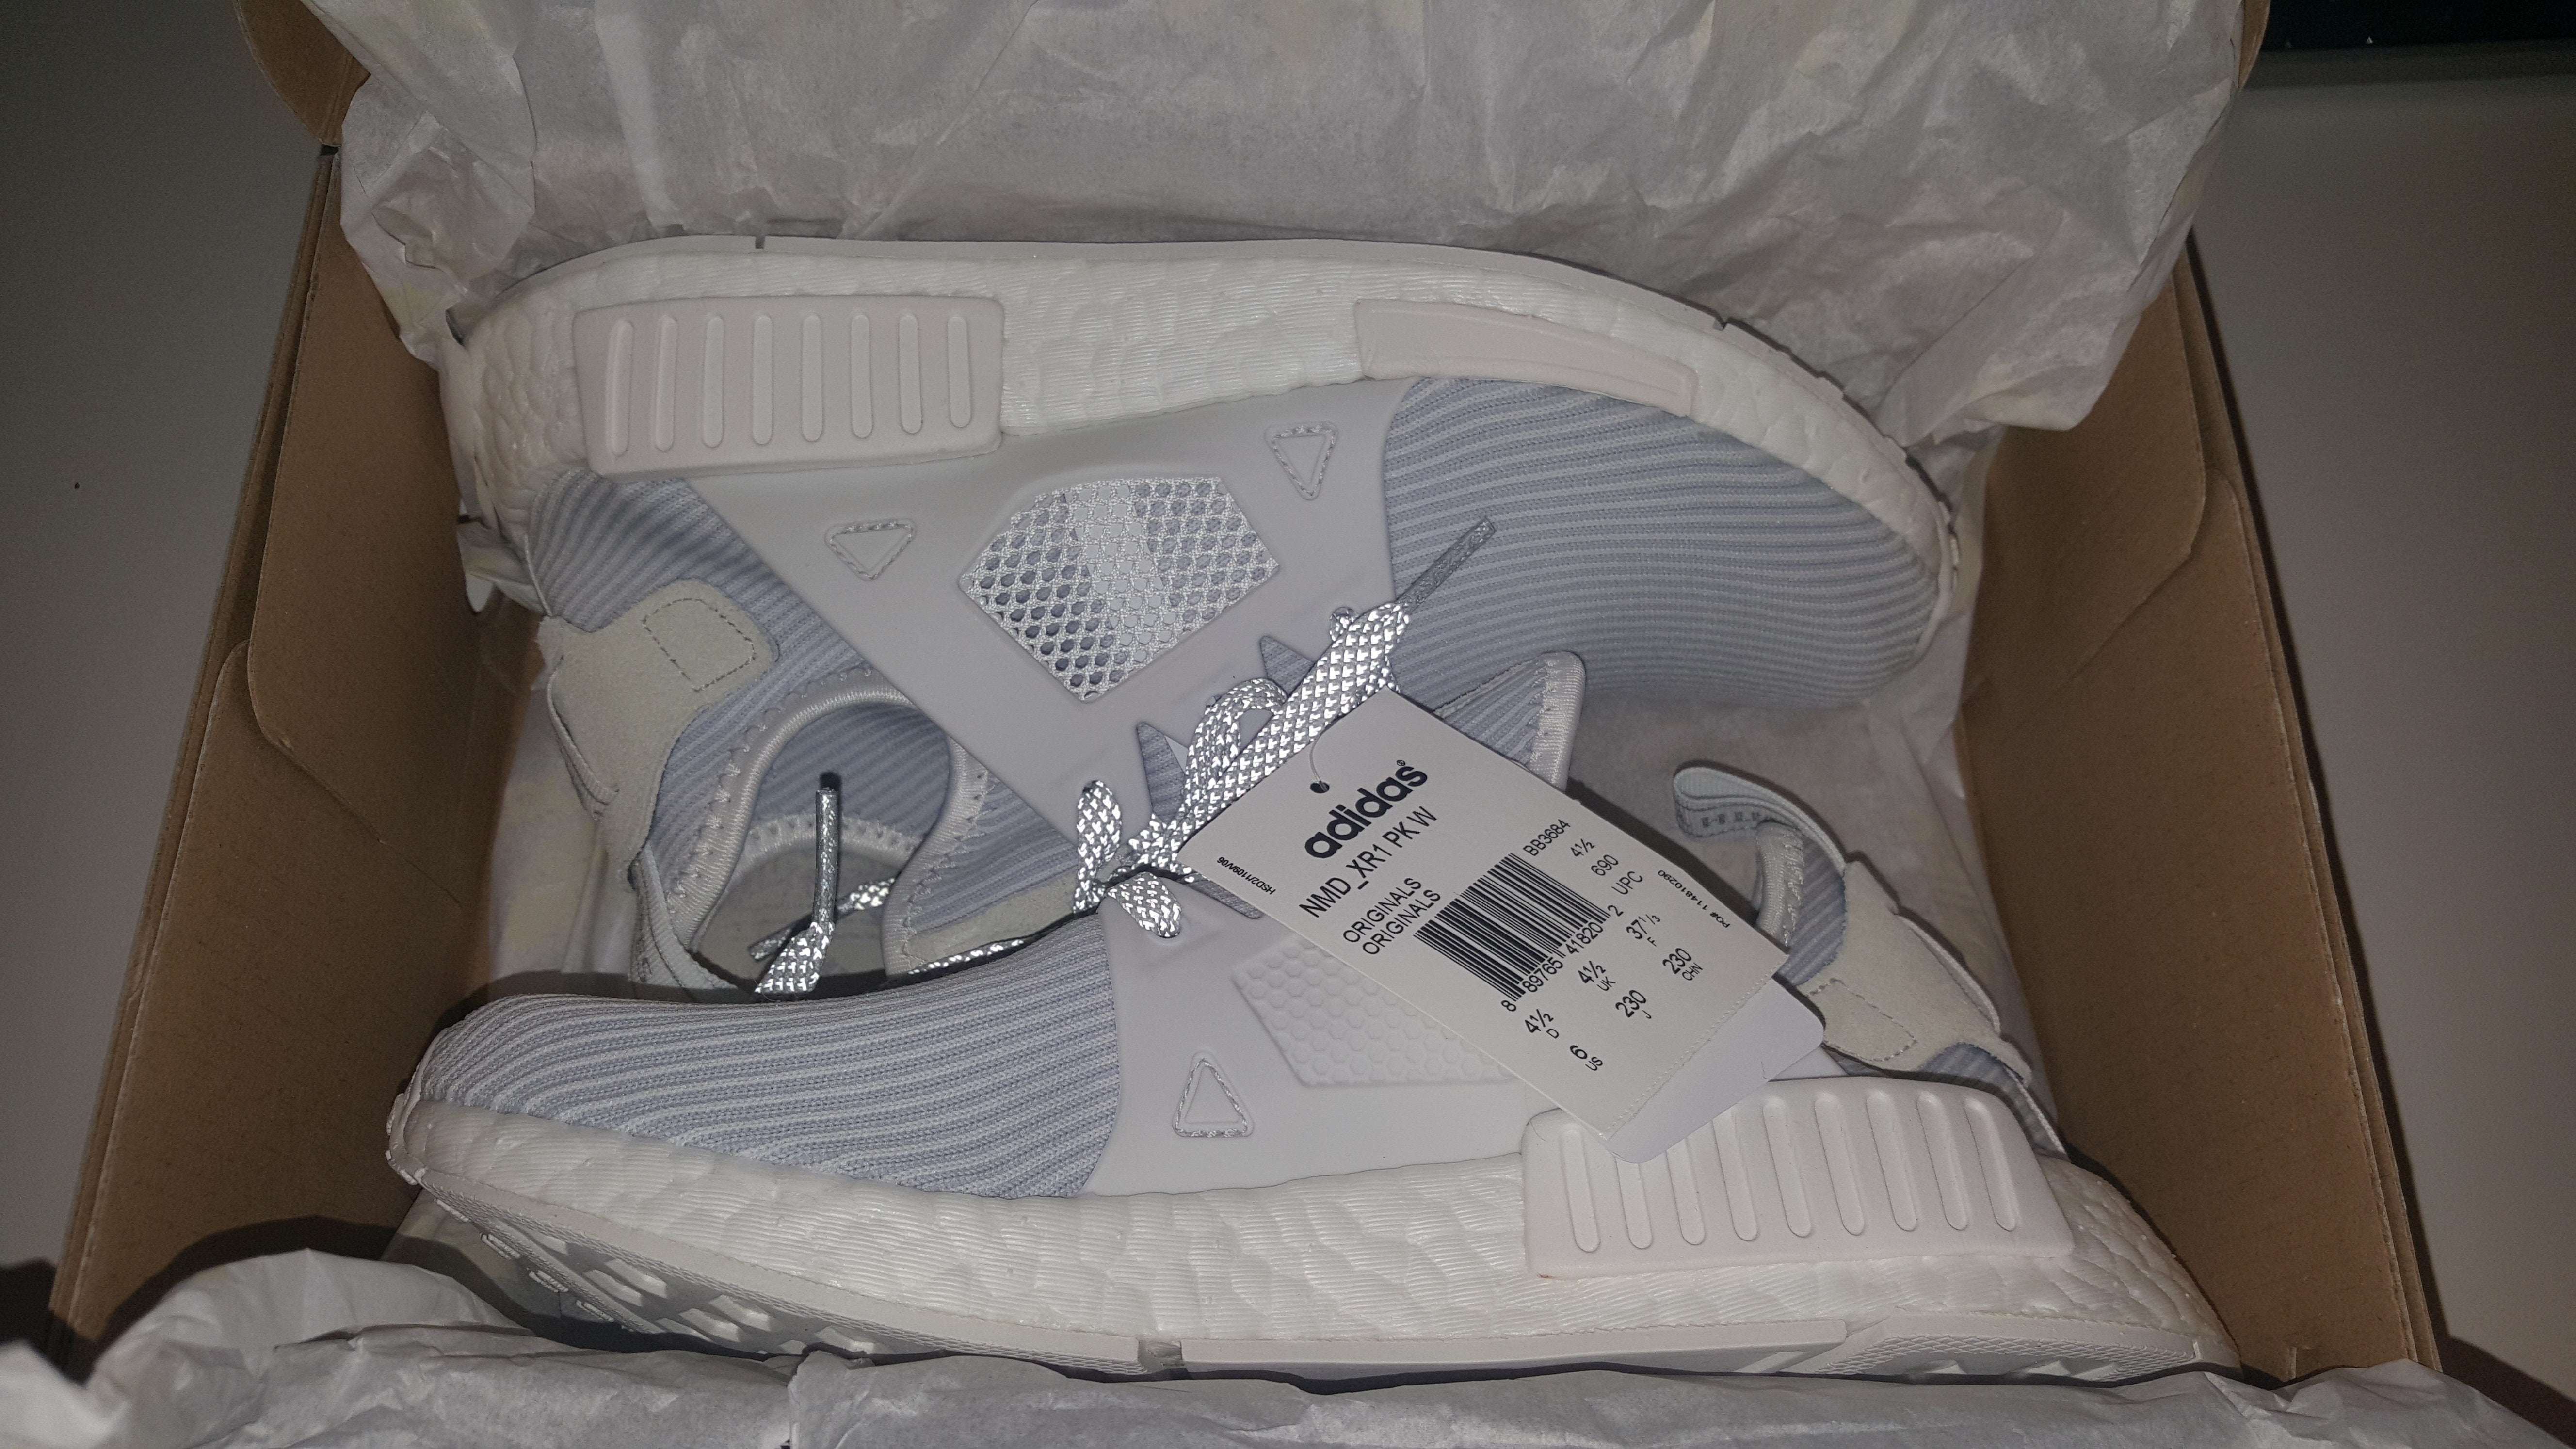 NMD XR1 - White - Women Size 6 for sale - RedFlagDeals.com Forums